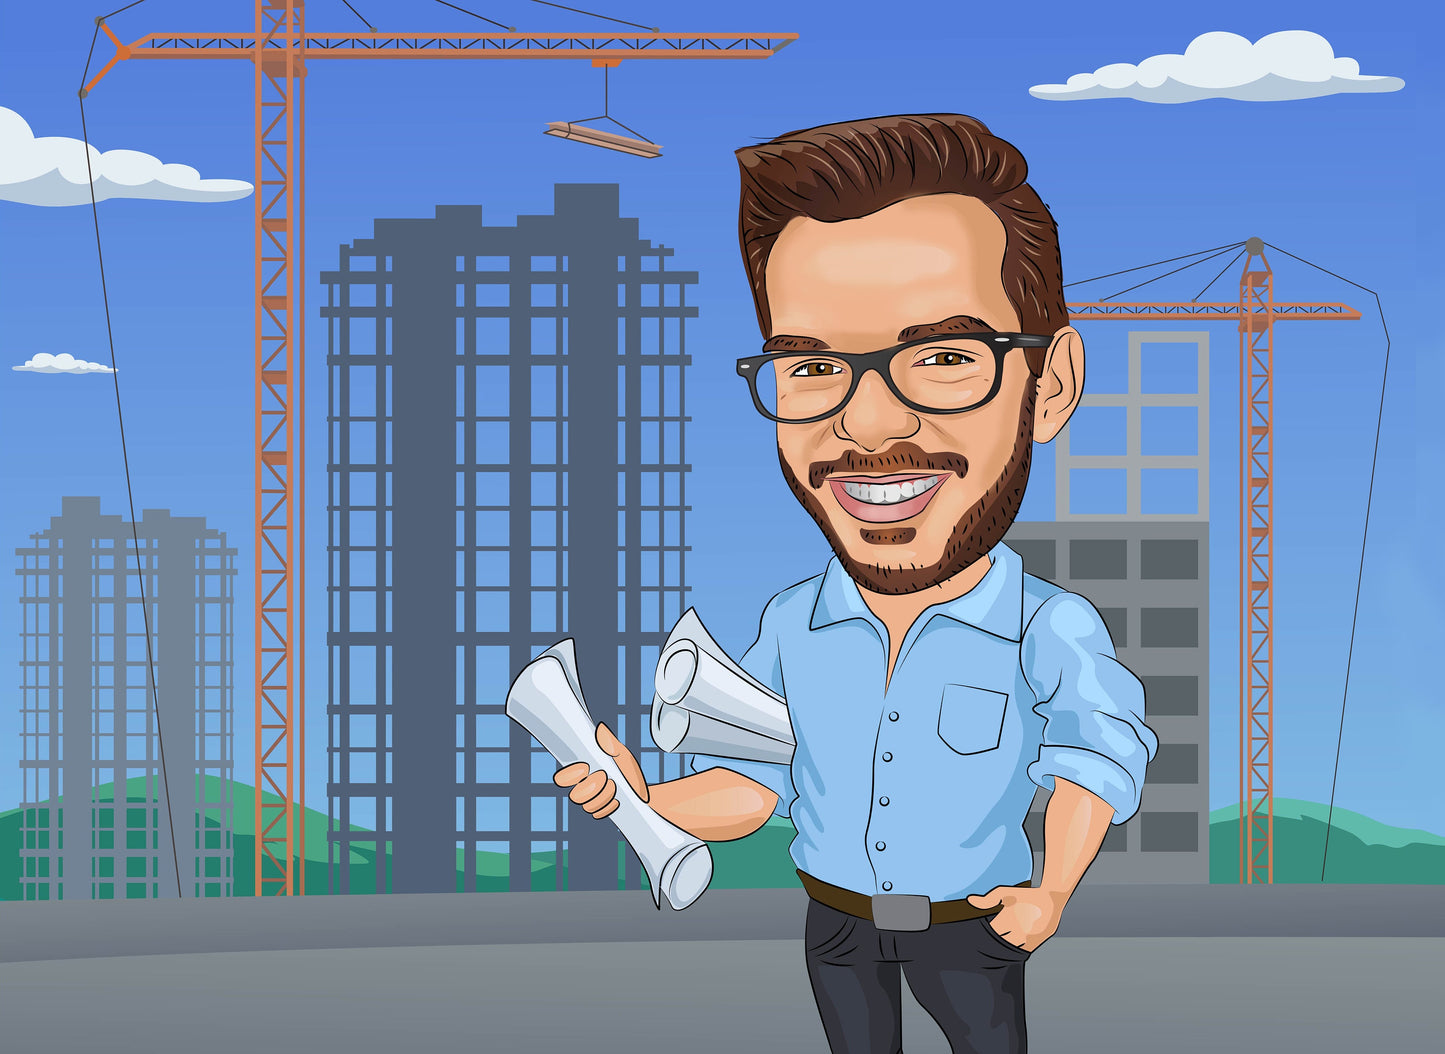 Civil Engineer Gift - Custom Caricature Portrait From Your Photo/Civil Engineering